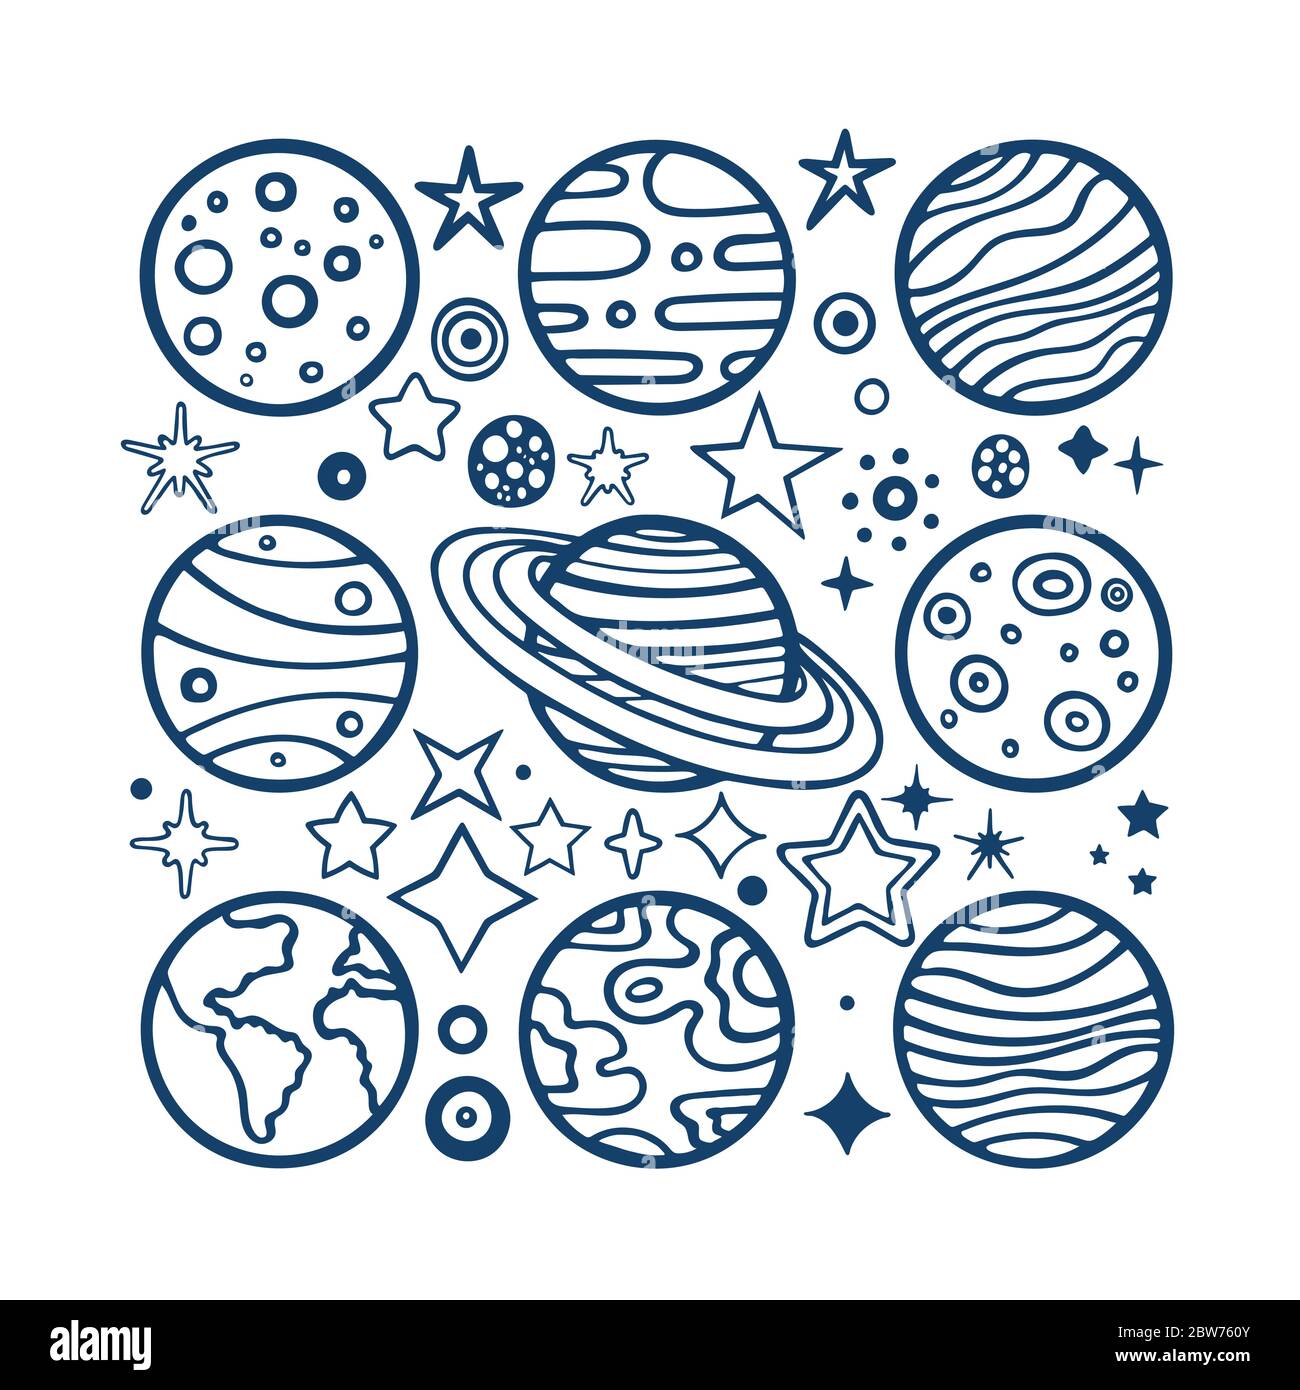 Solar system doodle Vector planets drawing for school education sketch of  jupiter and saturn sun and luna on outline orbits Stock Vector Image  Art   Alamy